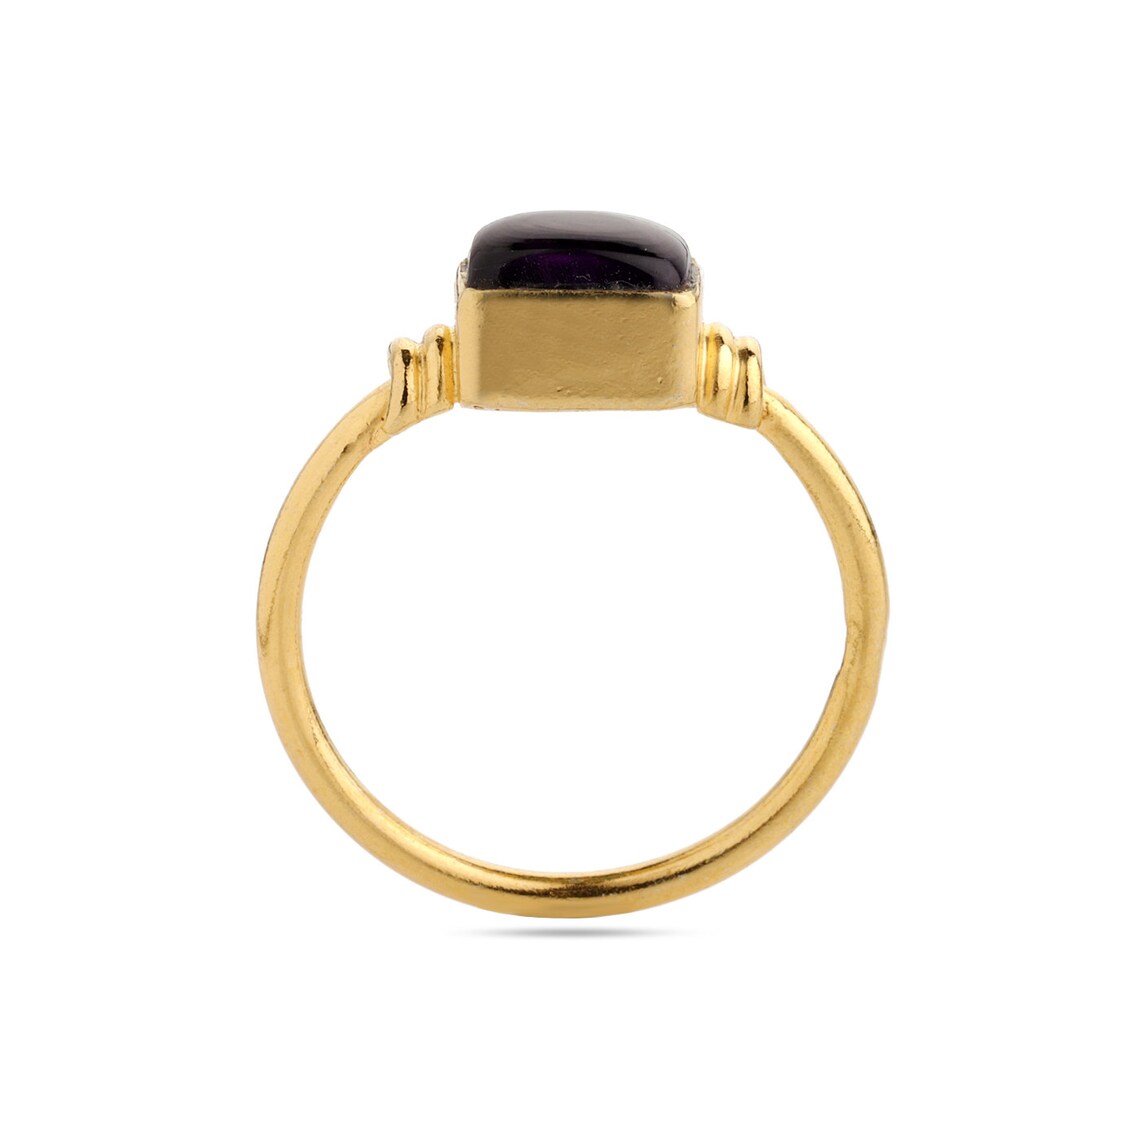 Amethyst Ring - 18K Gold Plated on 925 Sterling Silver Ring - Baguette Shape Stone Ring